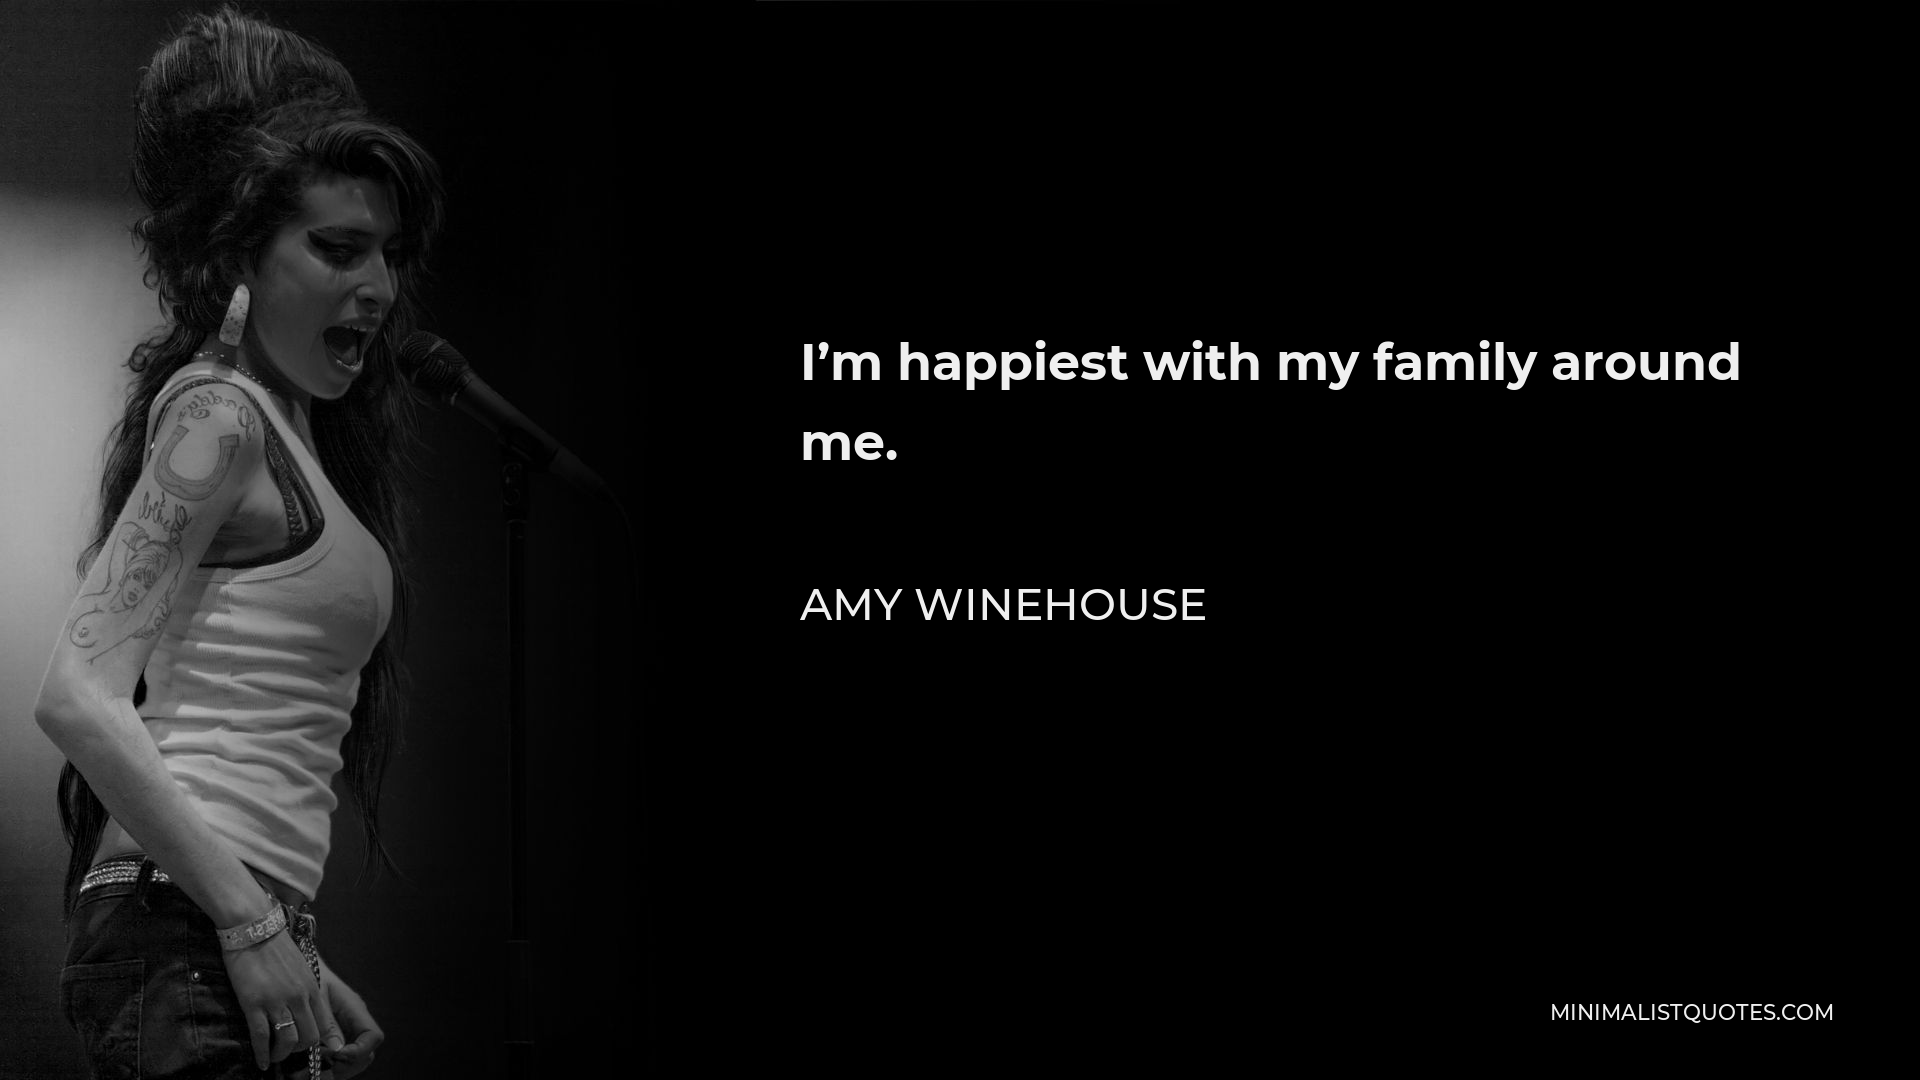 Amy Winehouse Quote - I’m happiest with my family around me.